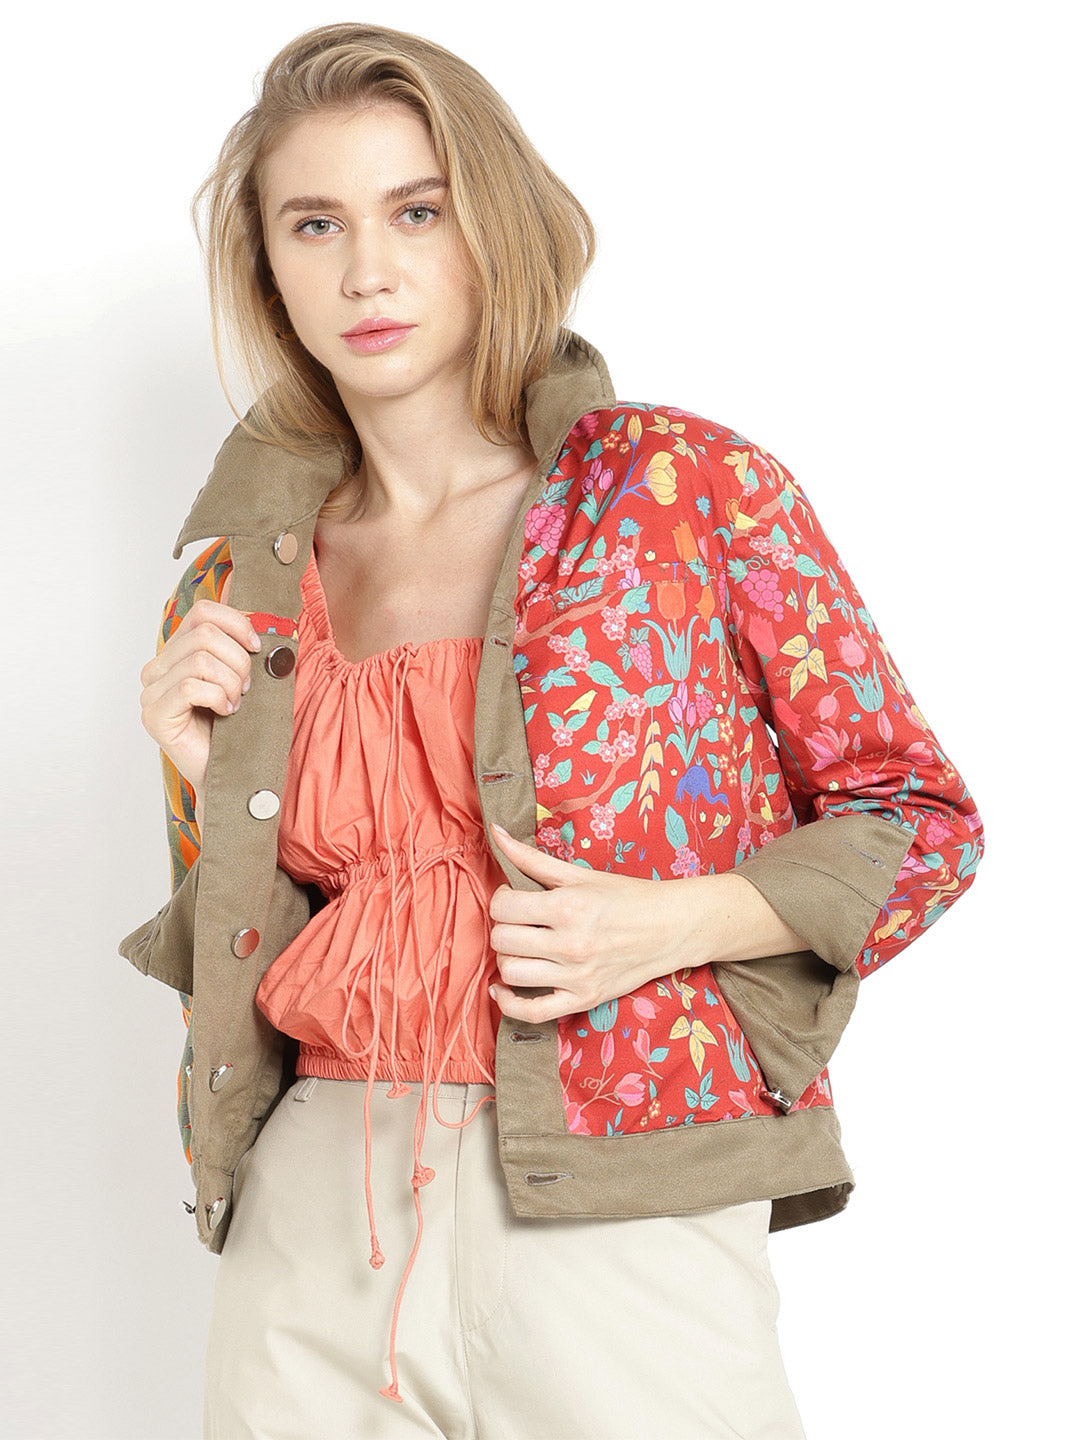 Hillary Reversible Jacket from Shaye , for women